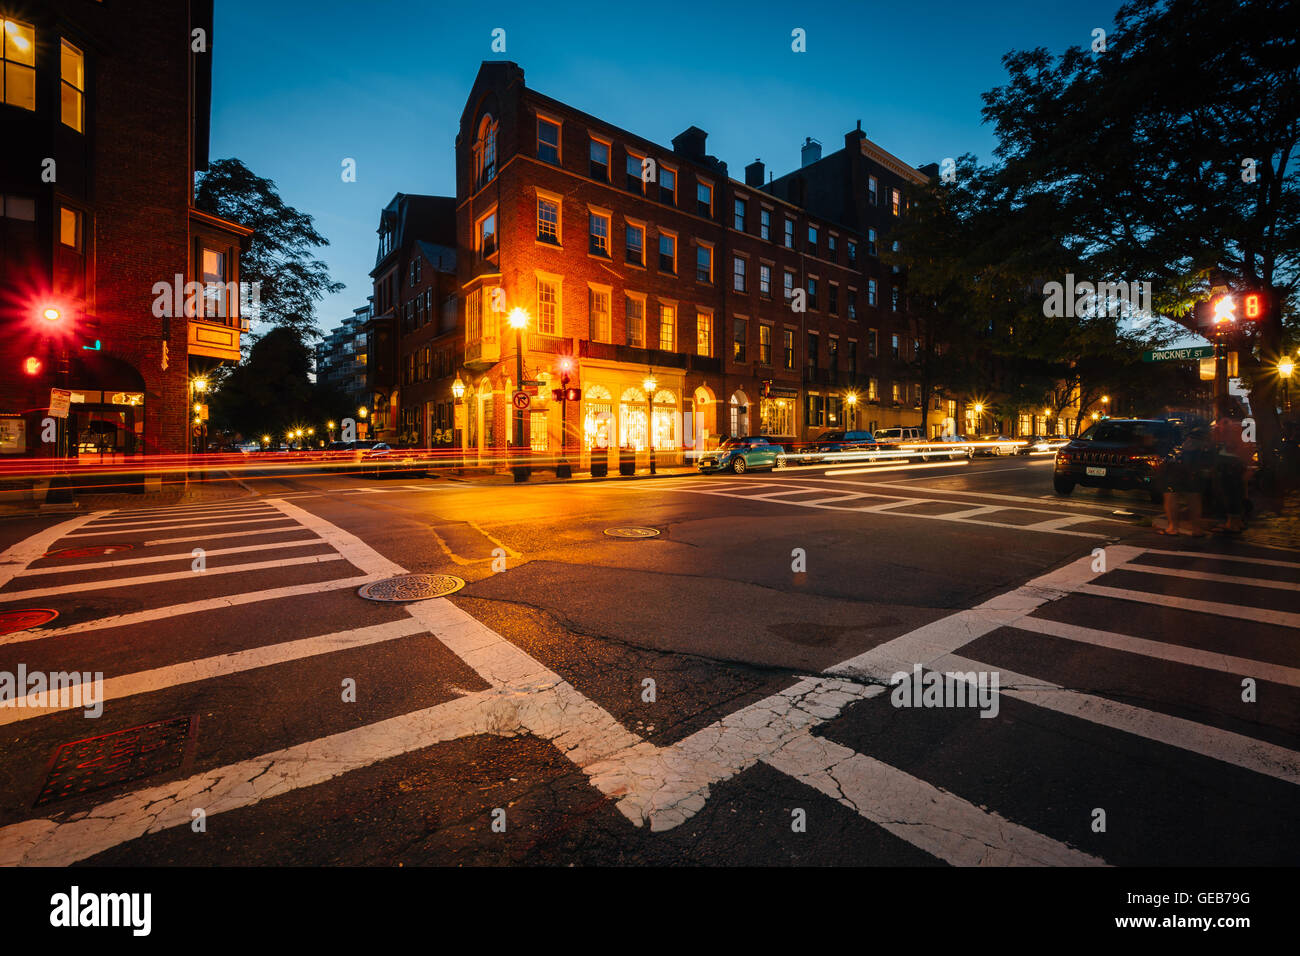 The intersection of Pinckney Street and Charles Street at night, in Beacon Hill, Boston, Massachusetts. Stock Photo